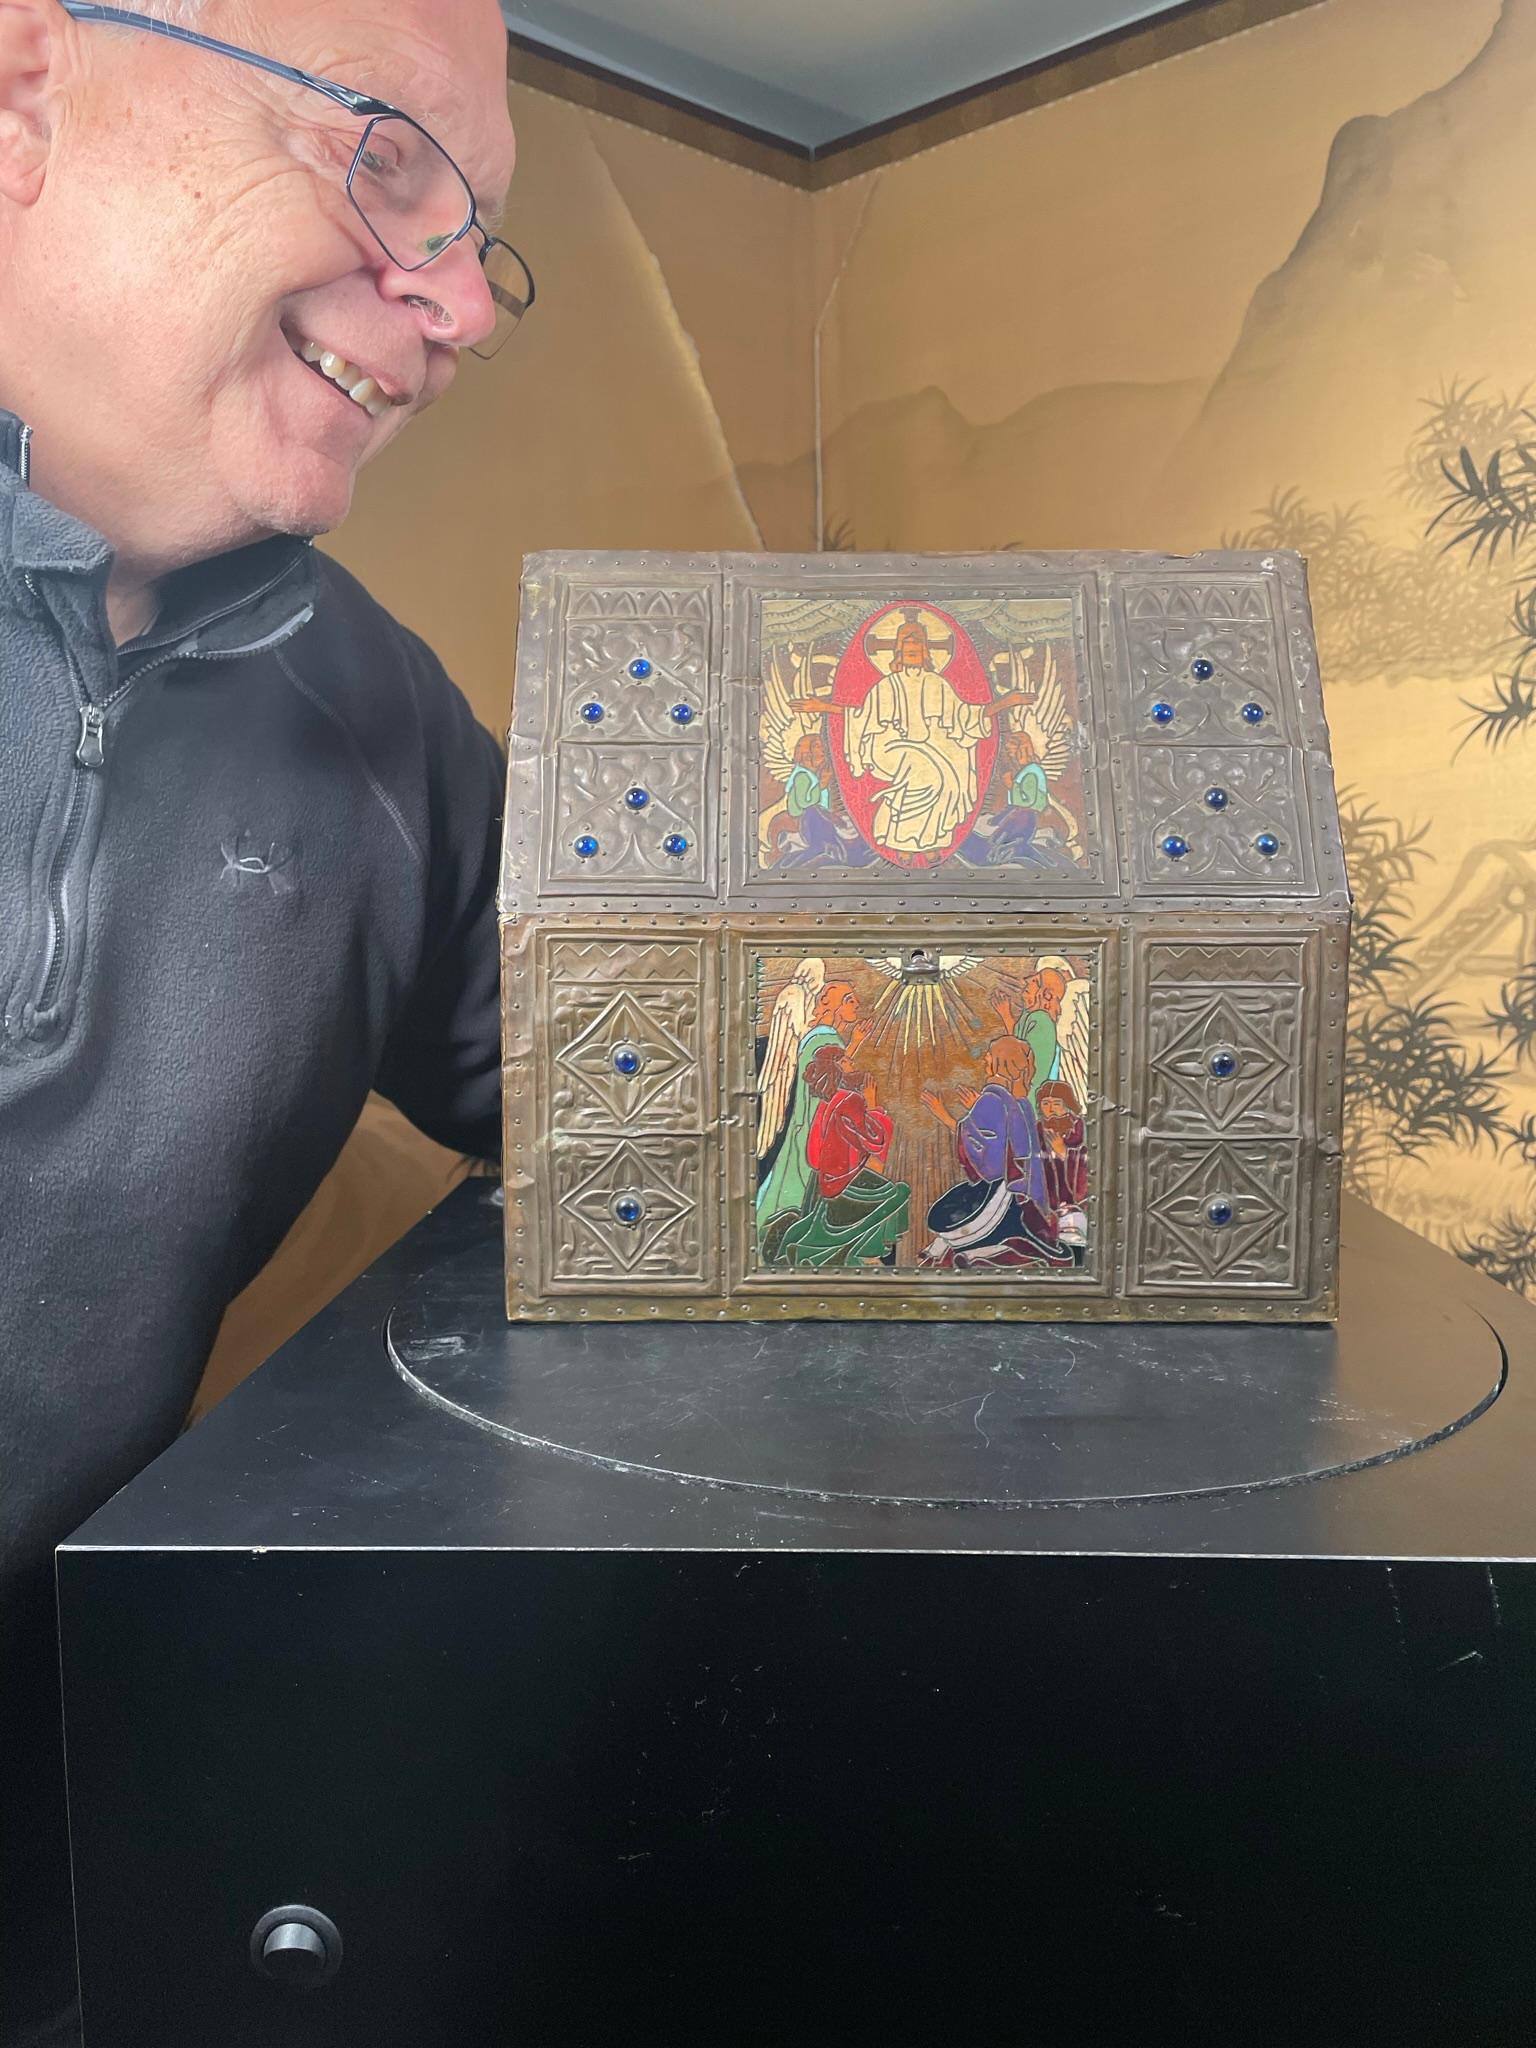 From an old French collection.

A fine hand crafted wood and repousse holy reliquary box of angular architectural form depicting Christ in Majesty , angels, and desciples on six surroundinig panels. Each panel is hand burned and polychromed in